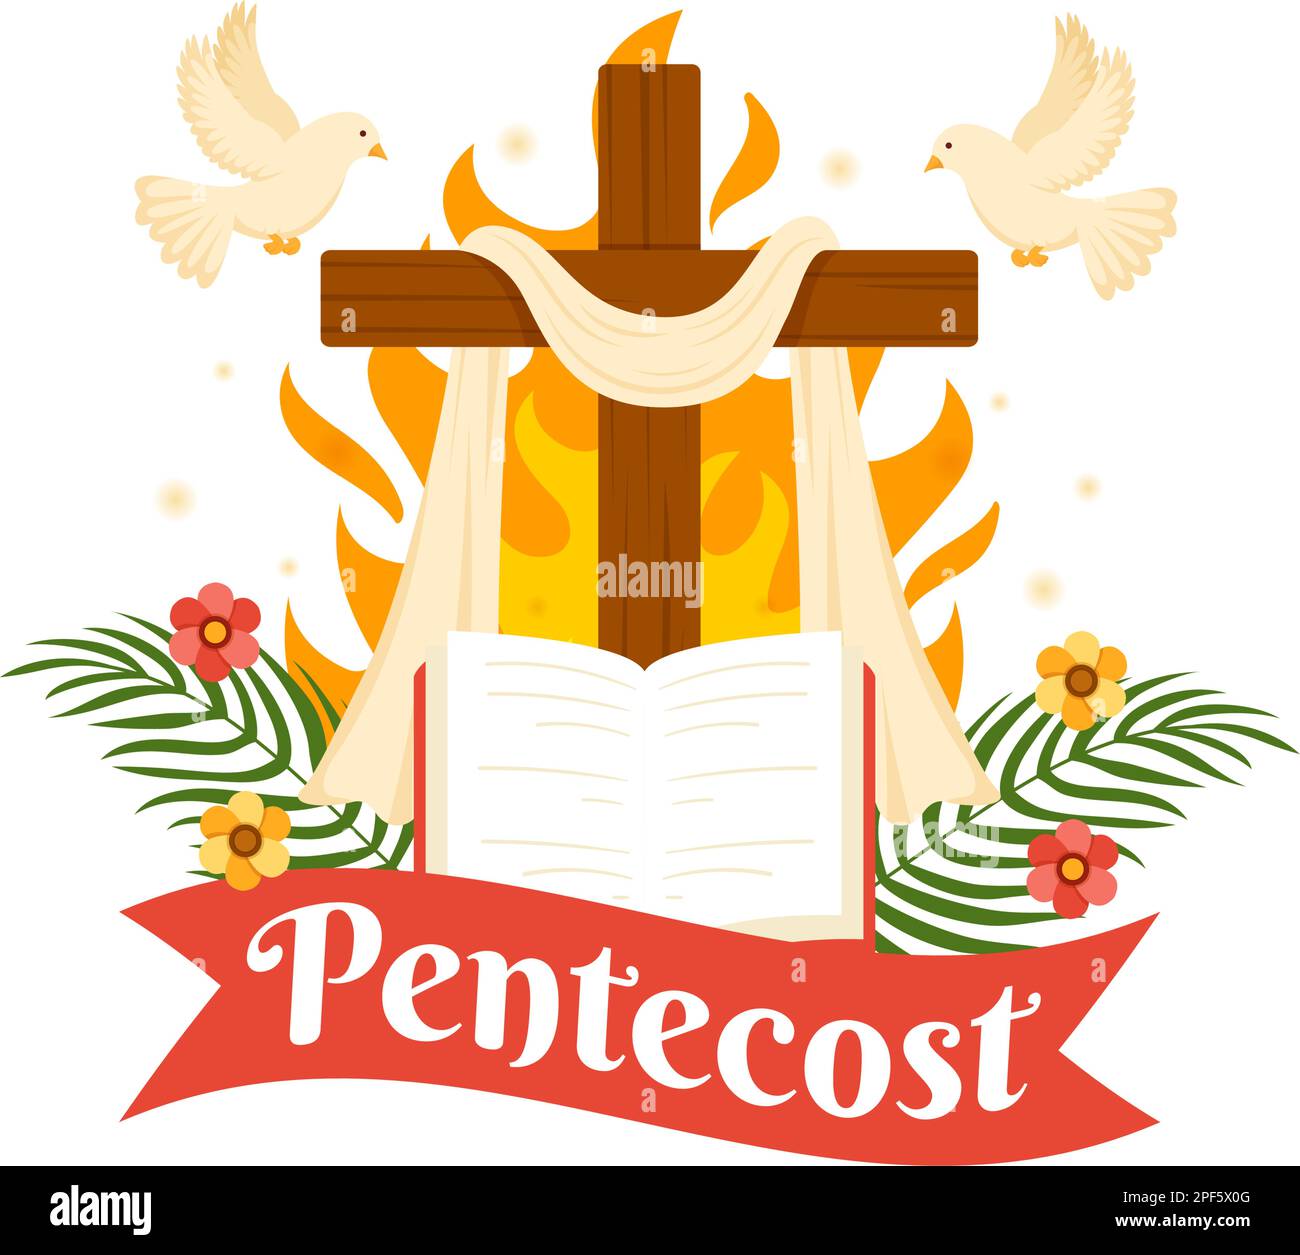 Pentecost Sunday Illustration with Flame and Holy Spirit Dove in Catholics or Christians Religious Culture Holiday Flat Cartoon Hand Drawn Templates Stock Vector